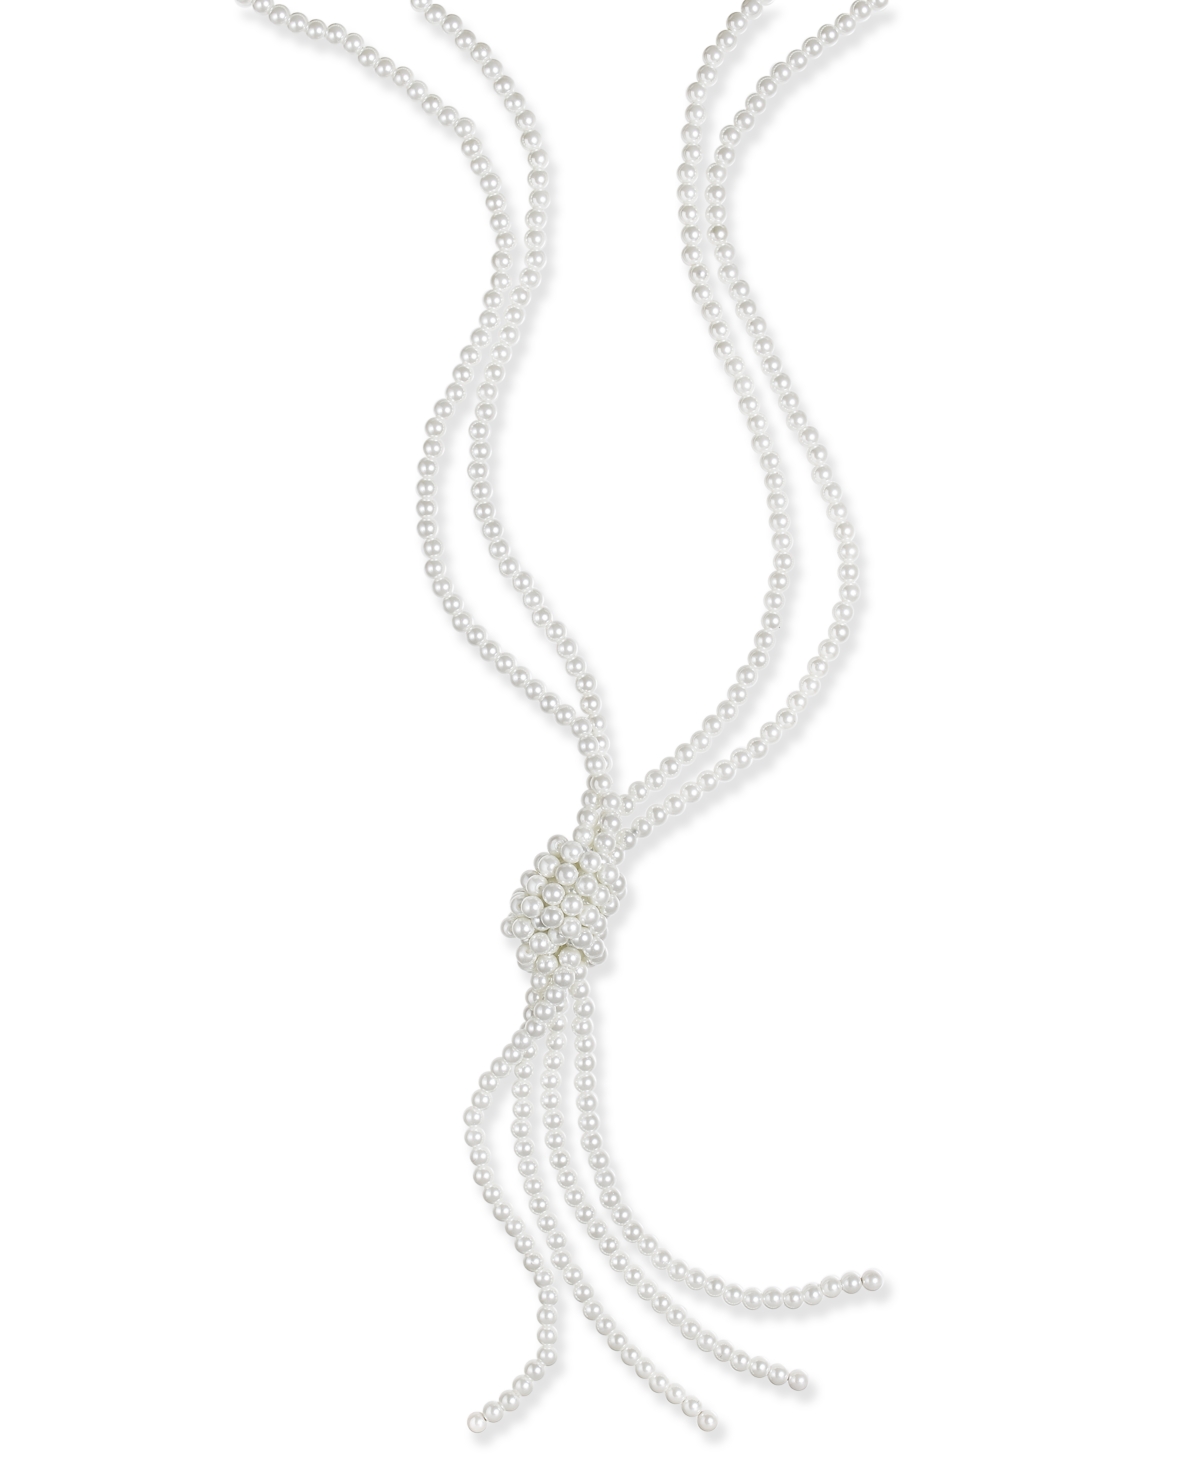 Imitation Pearl Knotted Lariat Necklace, 28" + 2" extender, Created for Macy's - White